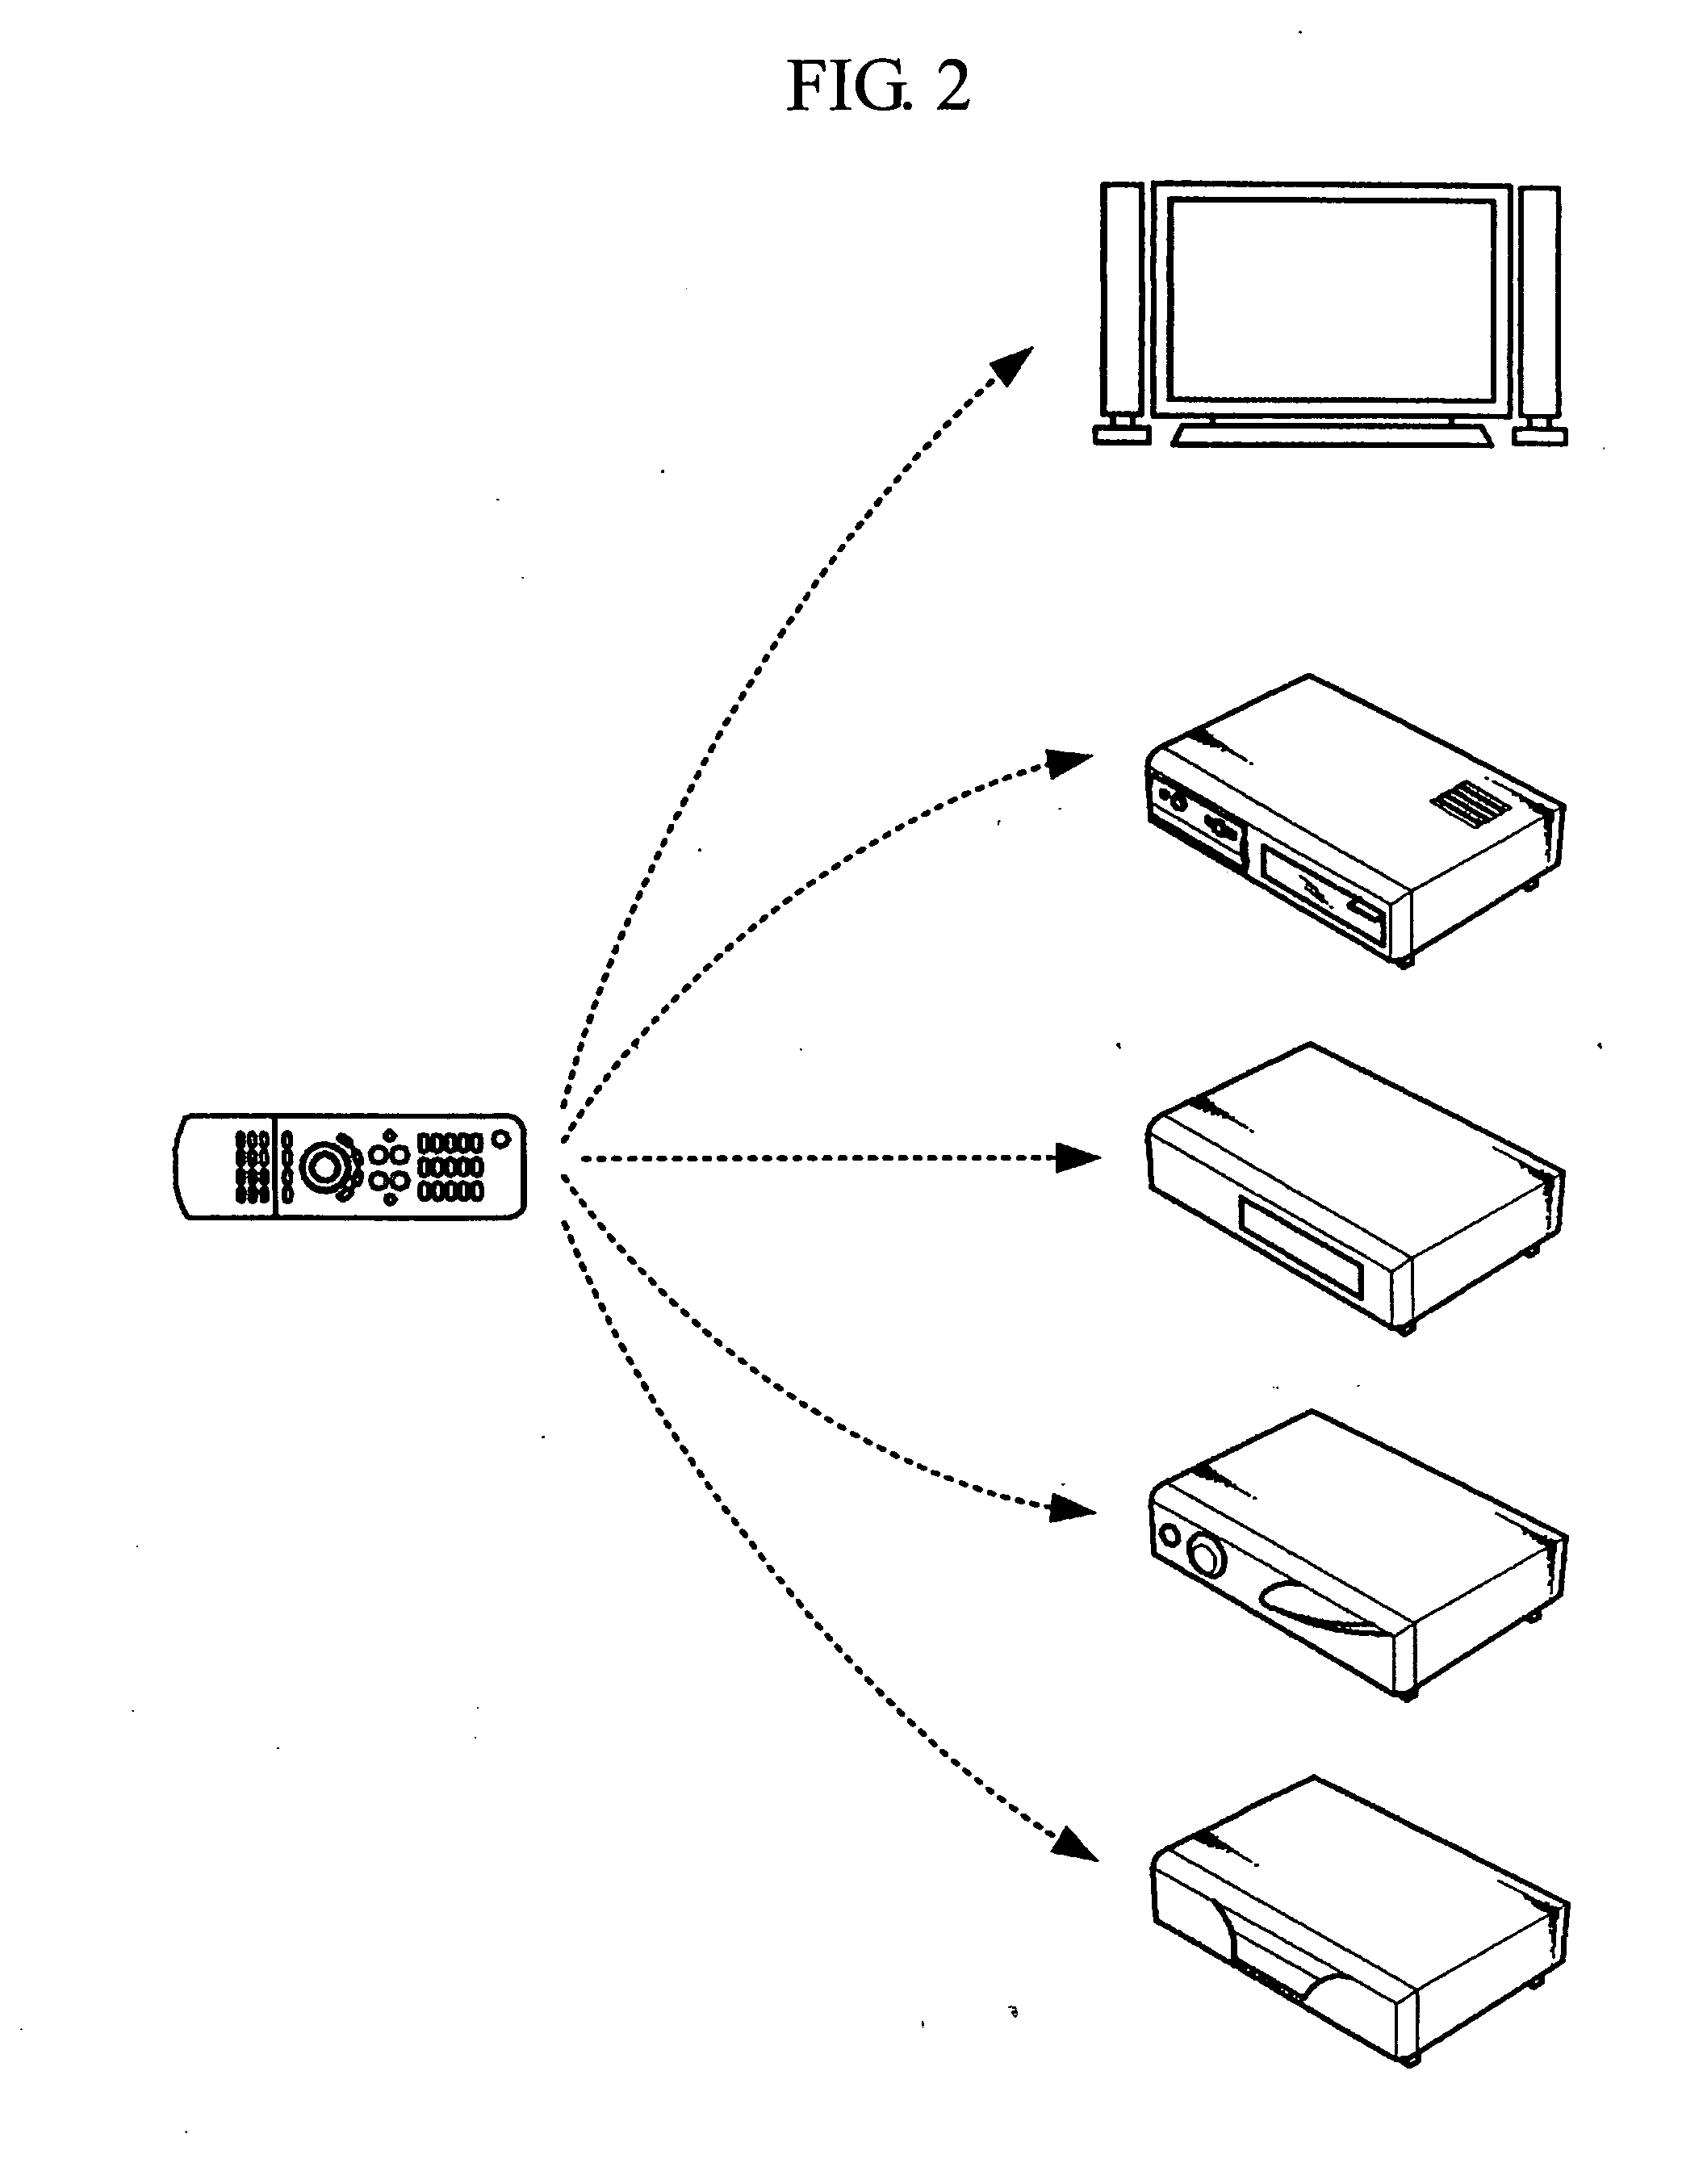 A/V system available for integrated control and method of controlling the same